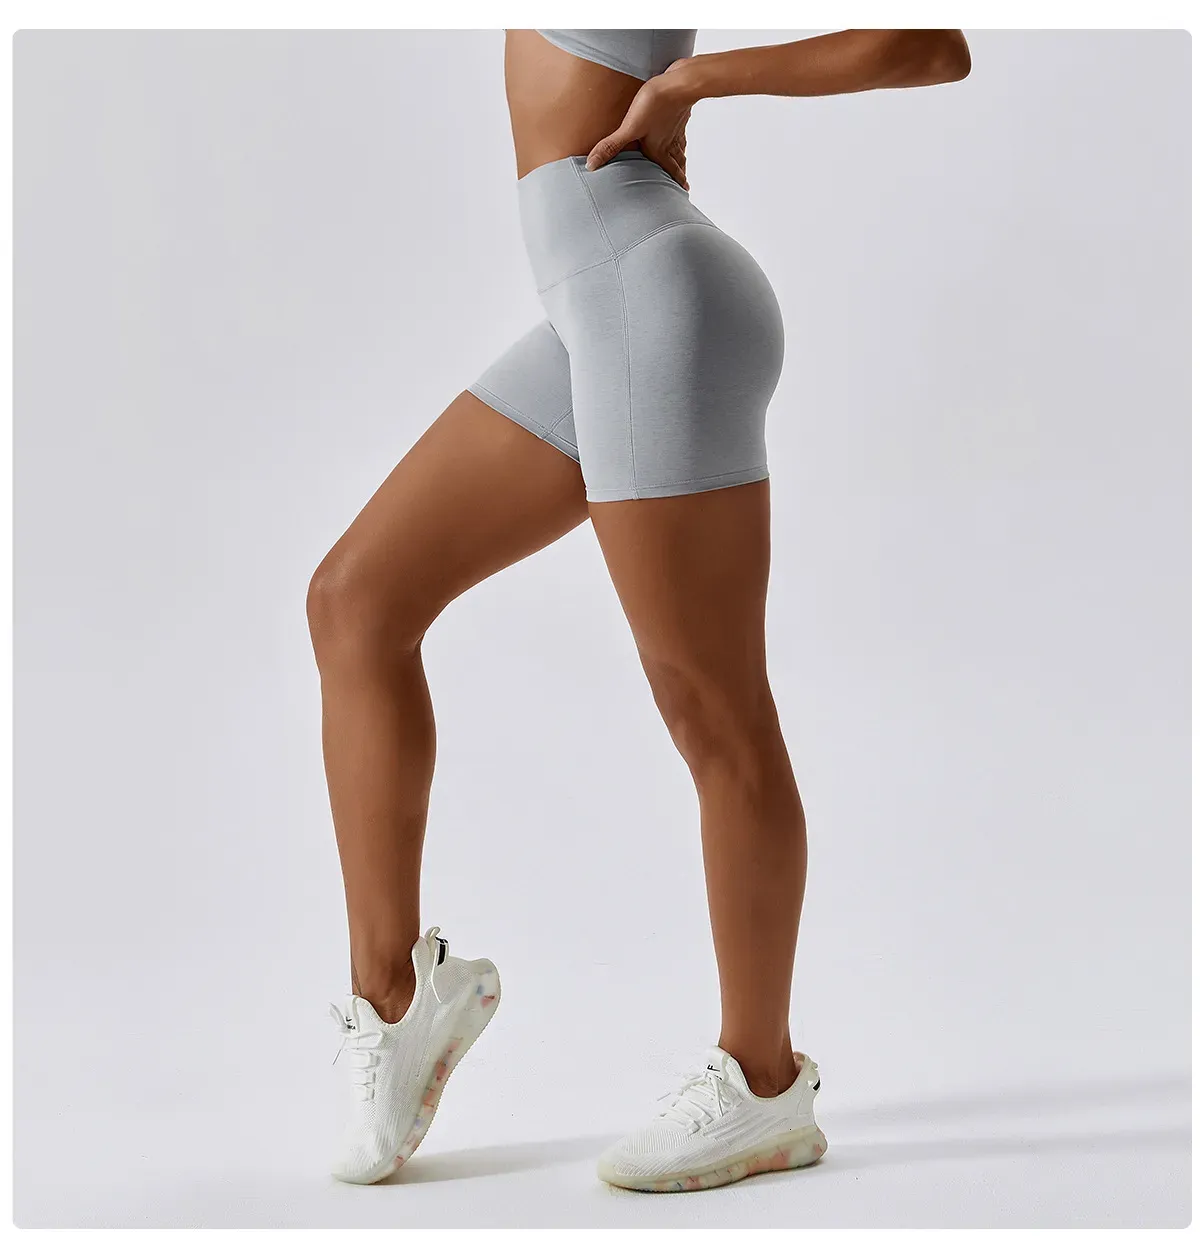 High Waist Scrunch Seamless Yoga Shorts For Women Tummy Control, Push Up,  Gym Outfit, Cycling Tights Perfect For Summer Alphalete Amplifiers Style  230412 From Lululu1, $16.35